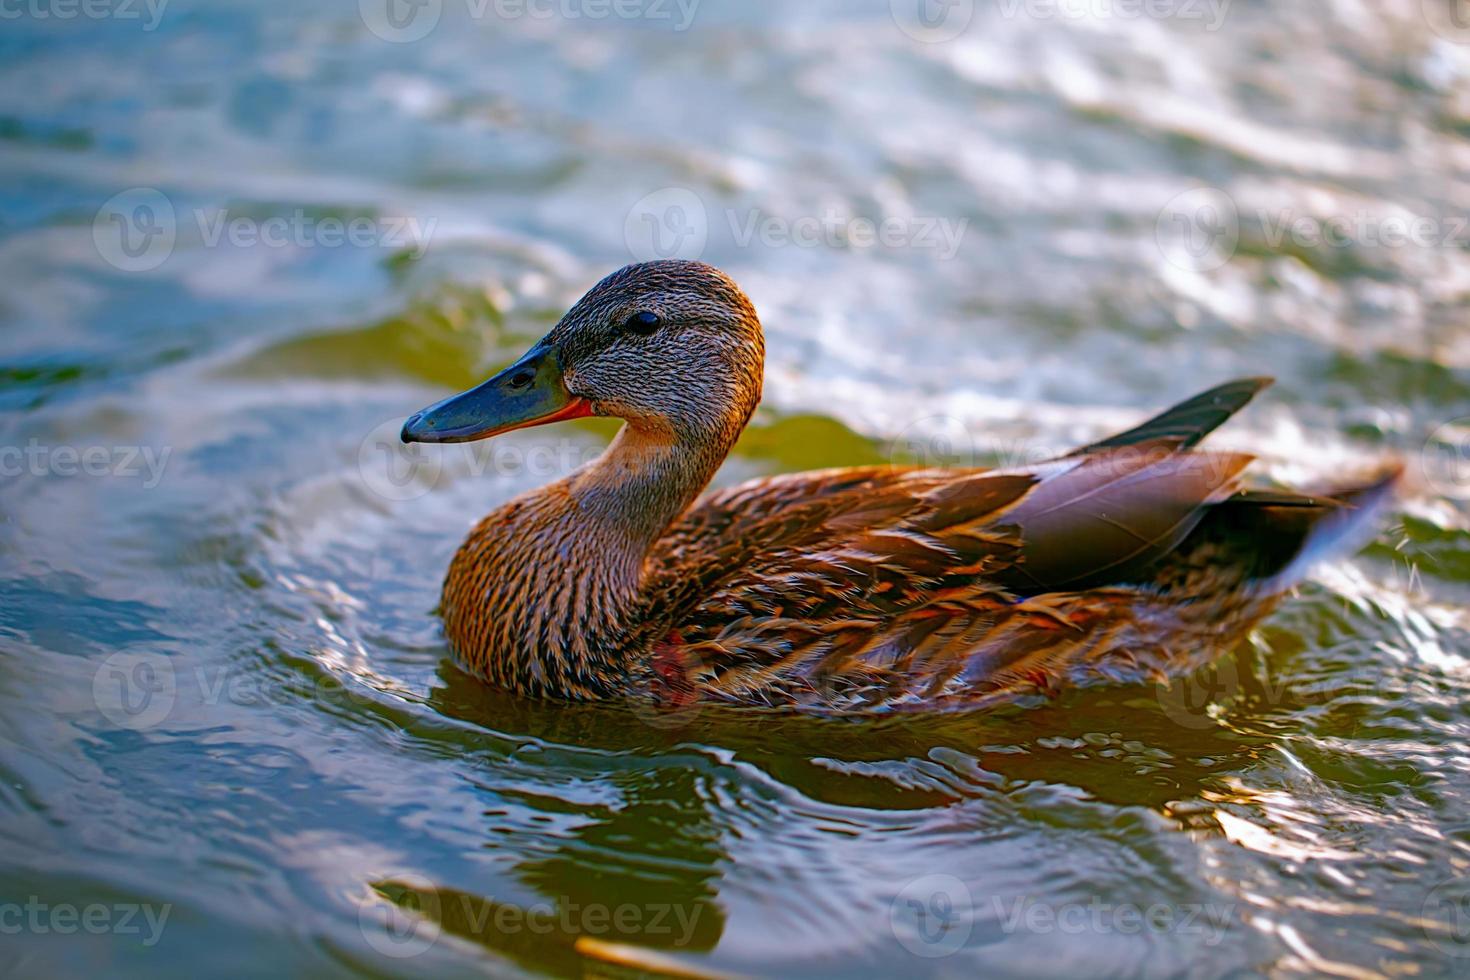 Birds and animals in the wild. A beautiful duck is swimming in blue water. Close-up of a river duck. photo